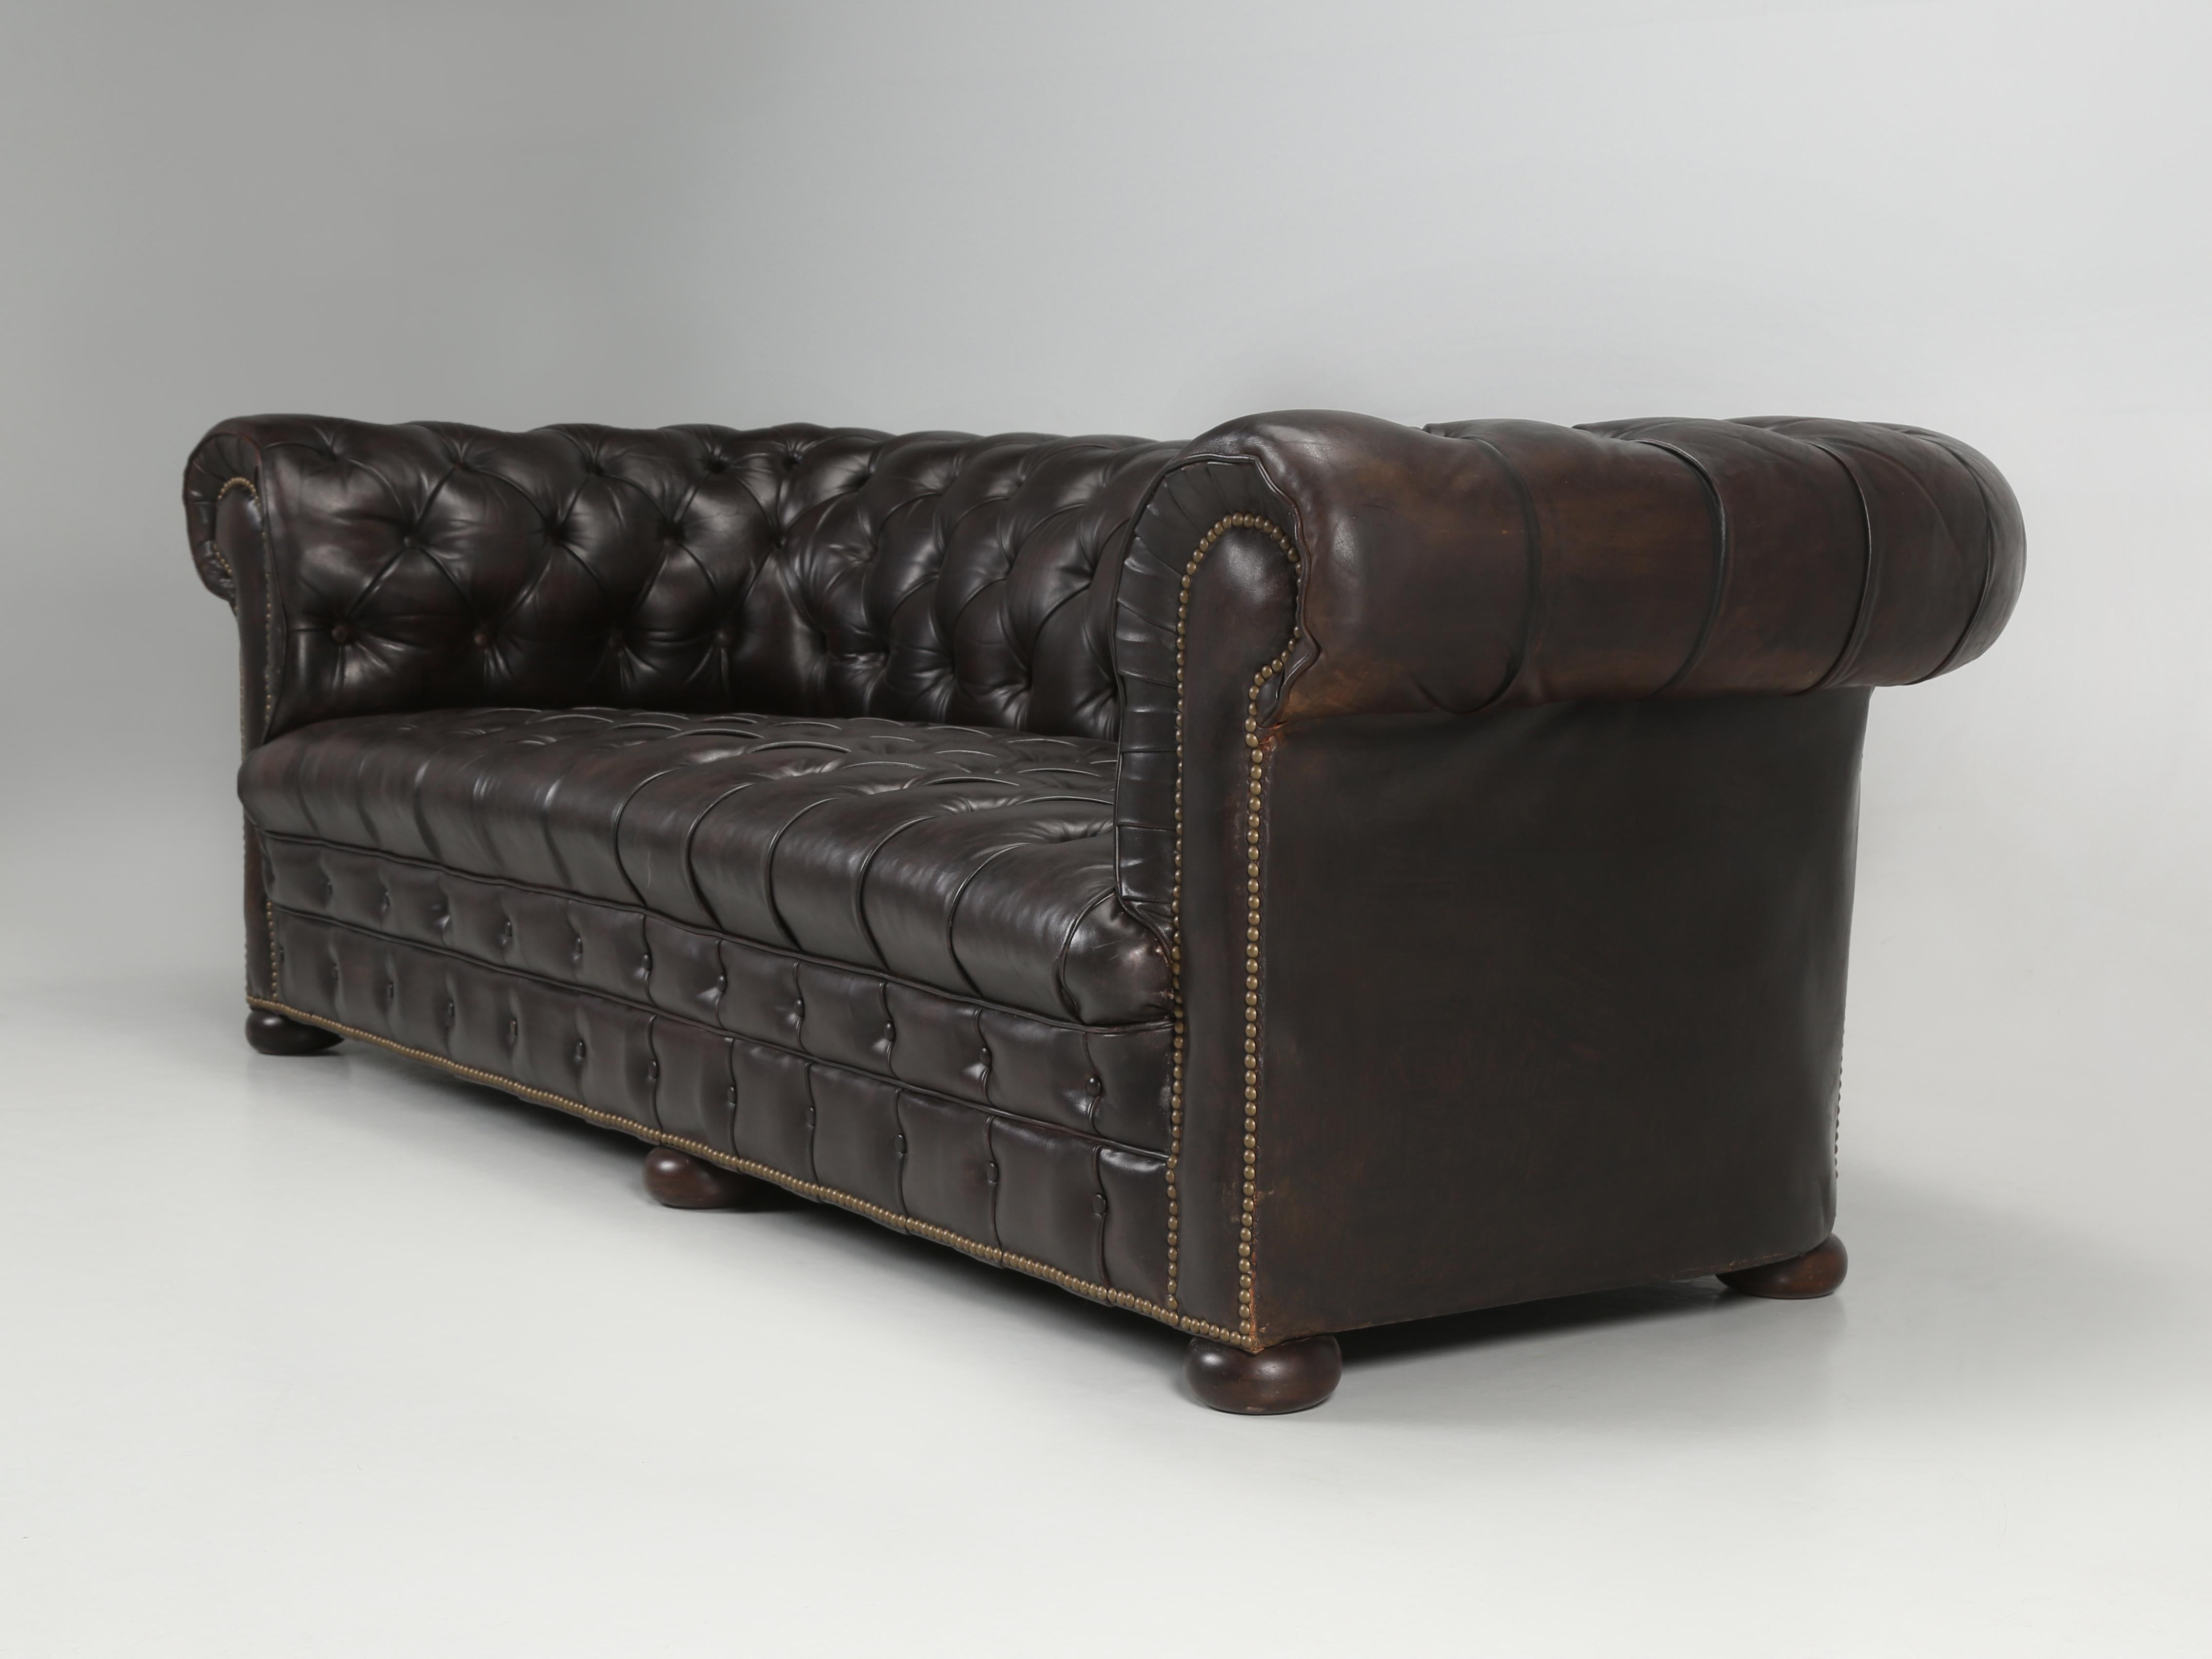 Antique English Tufted Original Leather Chesterfield Sofa Thoroughly Restored For Sale 9